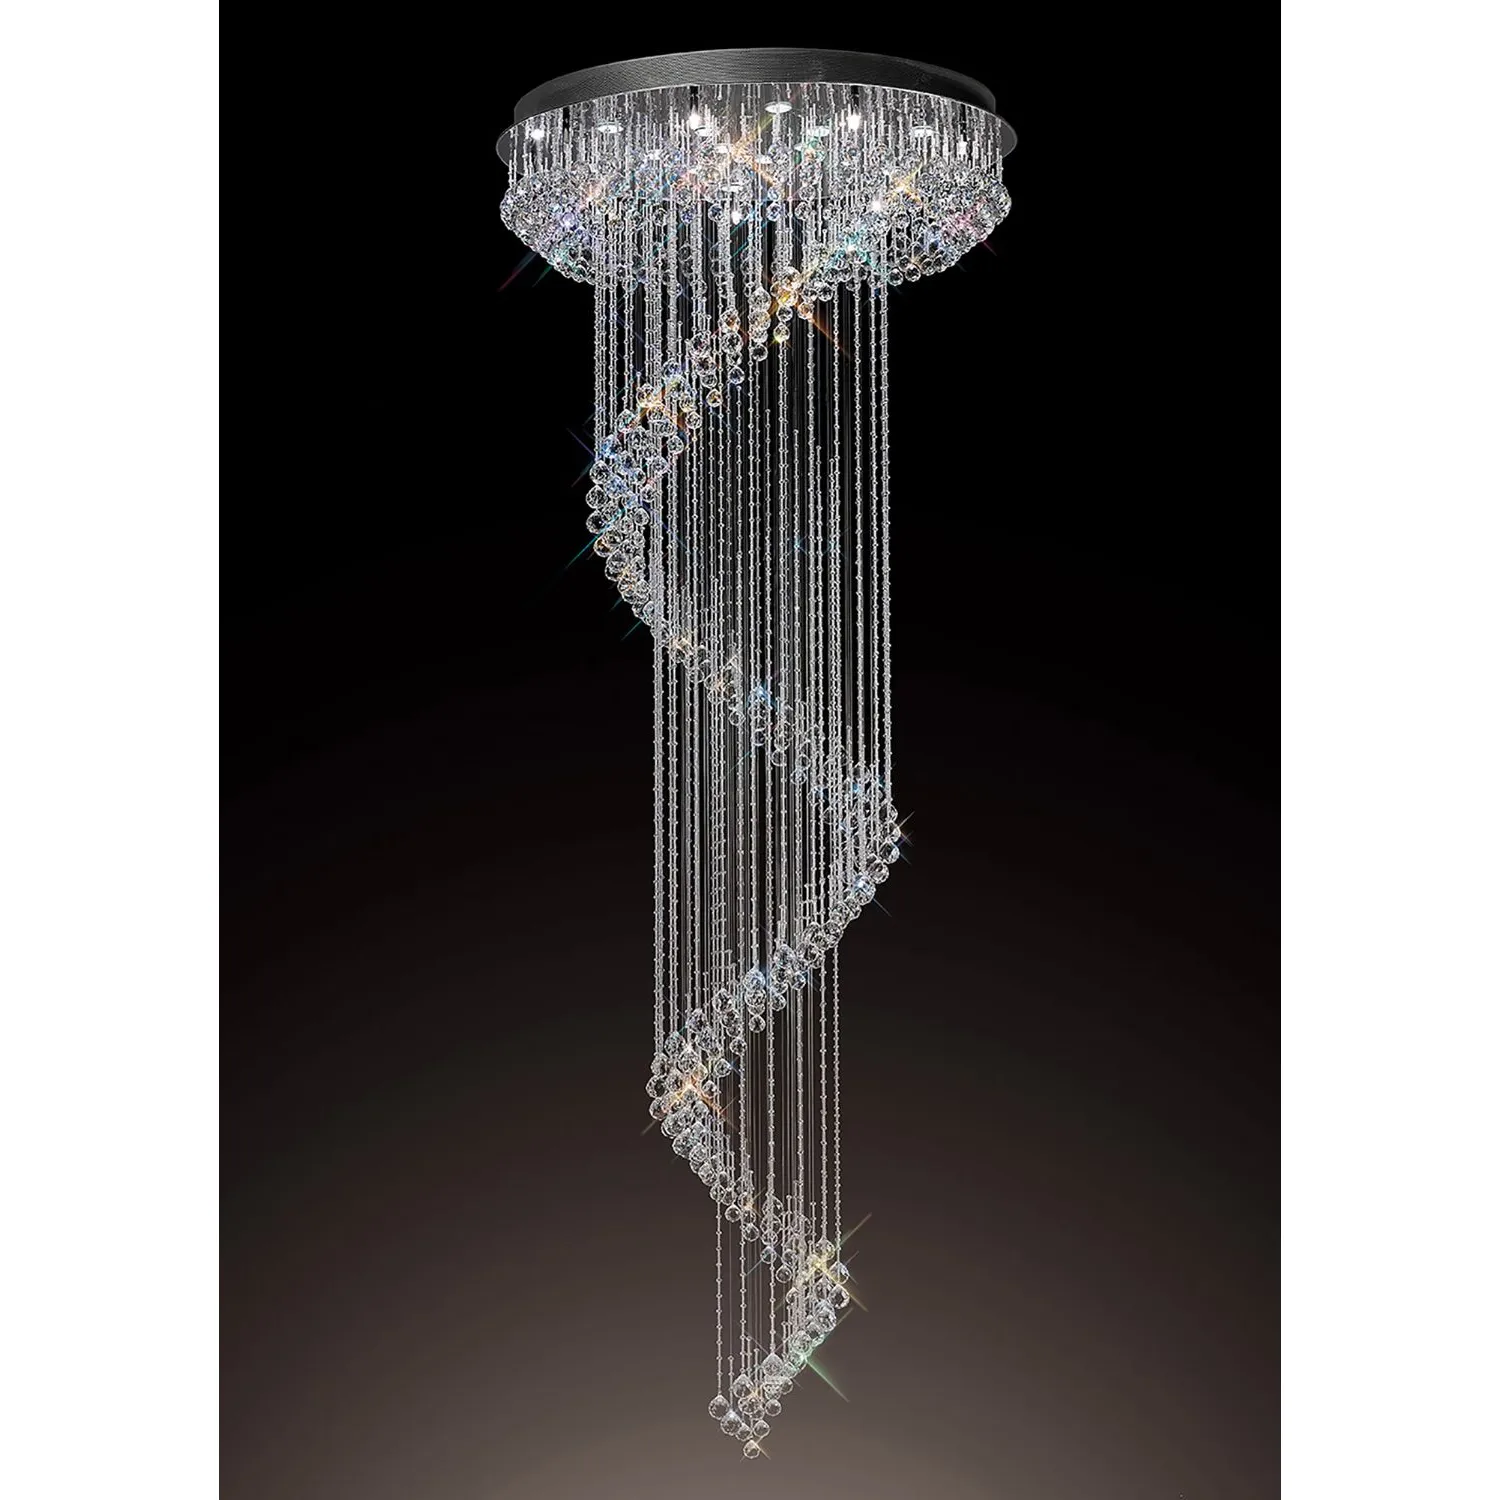 Colorado Pendant Multi Spiral 24 Light Polished Chrome Crystal (Pallet Shipment Only, Additional Charges May Apply.) Item Weight: 33.8kg